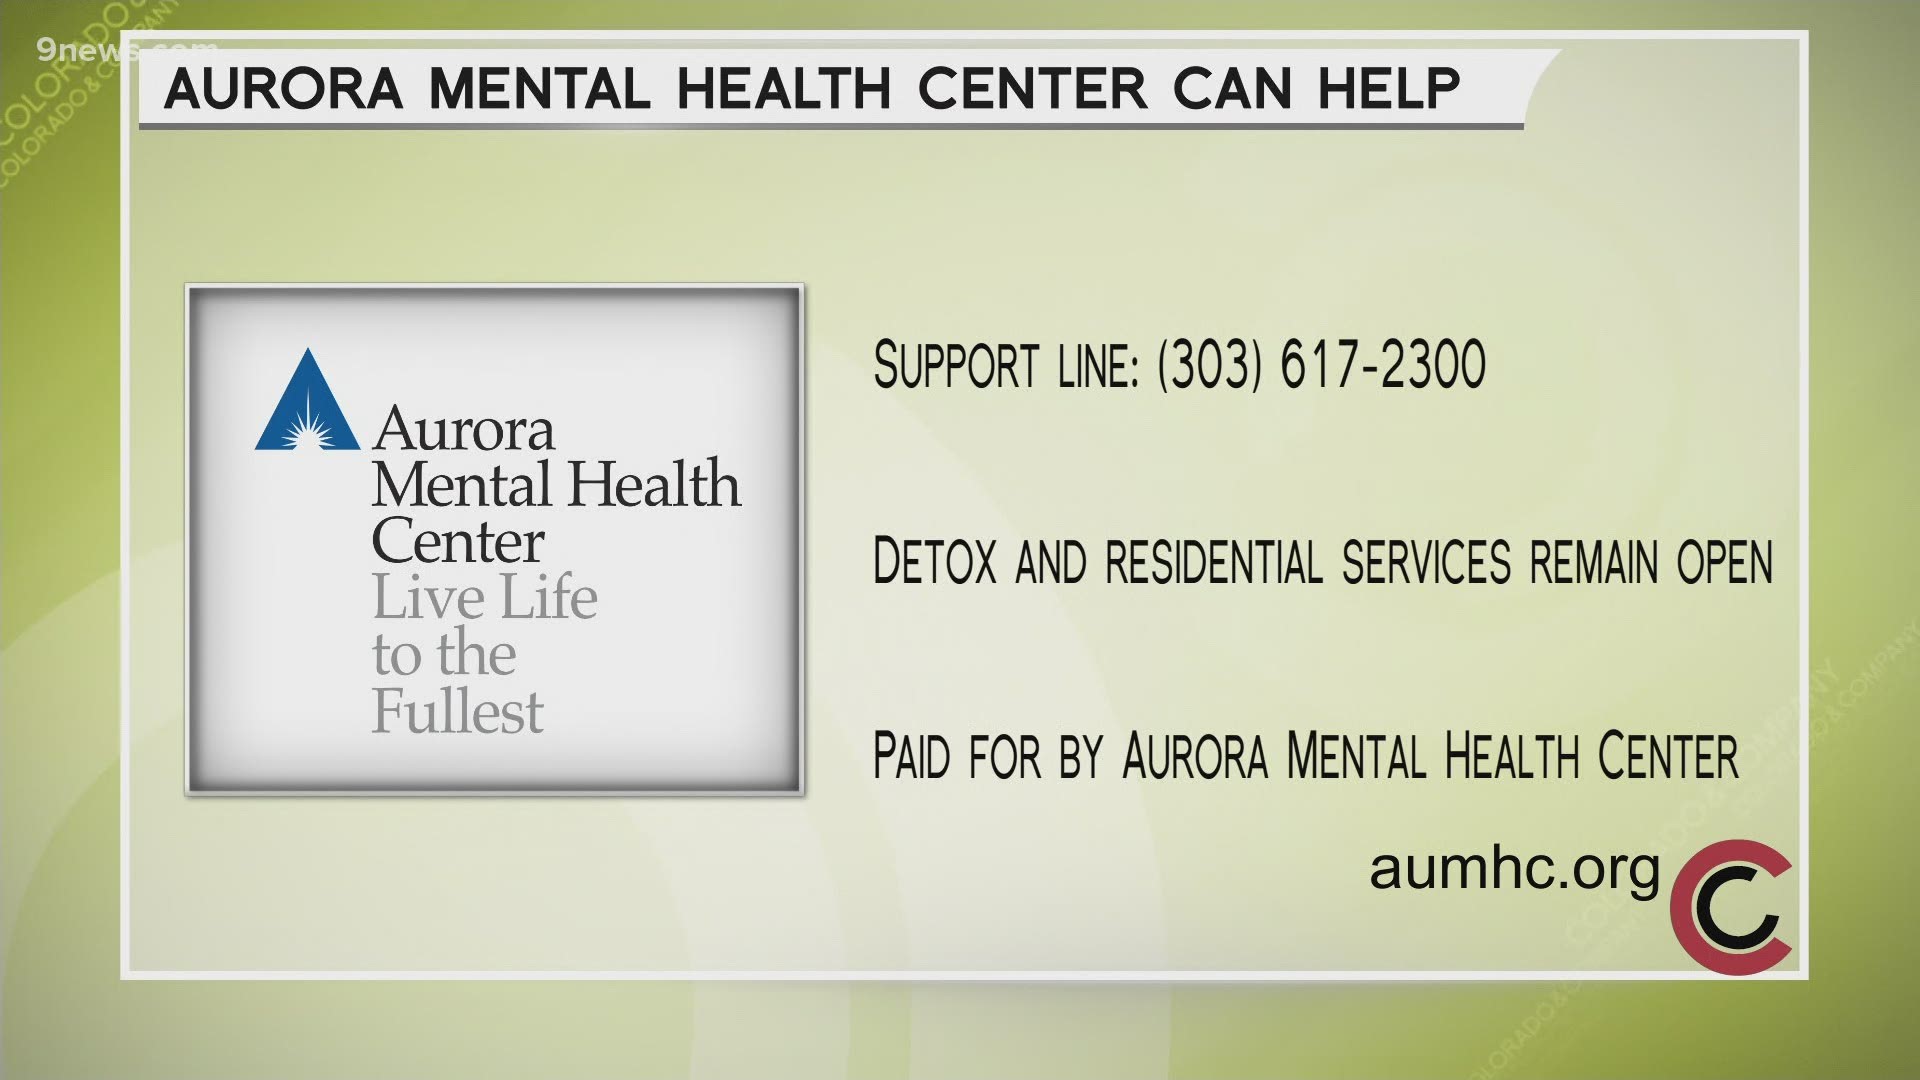 Call the support line at 303.617.2300 to talk to someone who can help. Residential and Detox services are still open. Learn more at AUMHC.org.